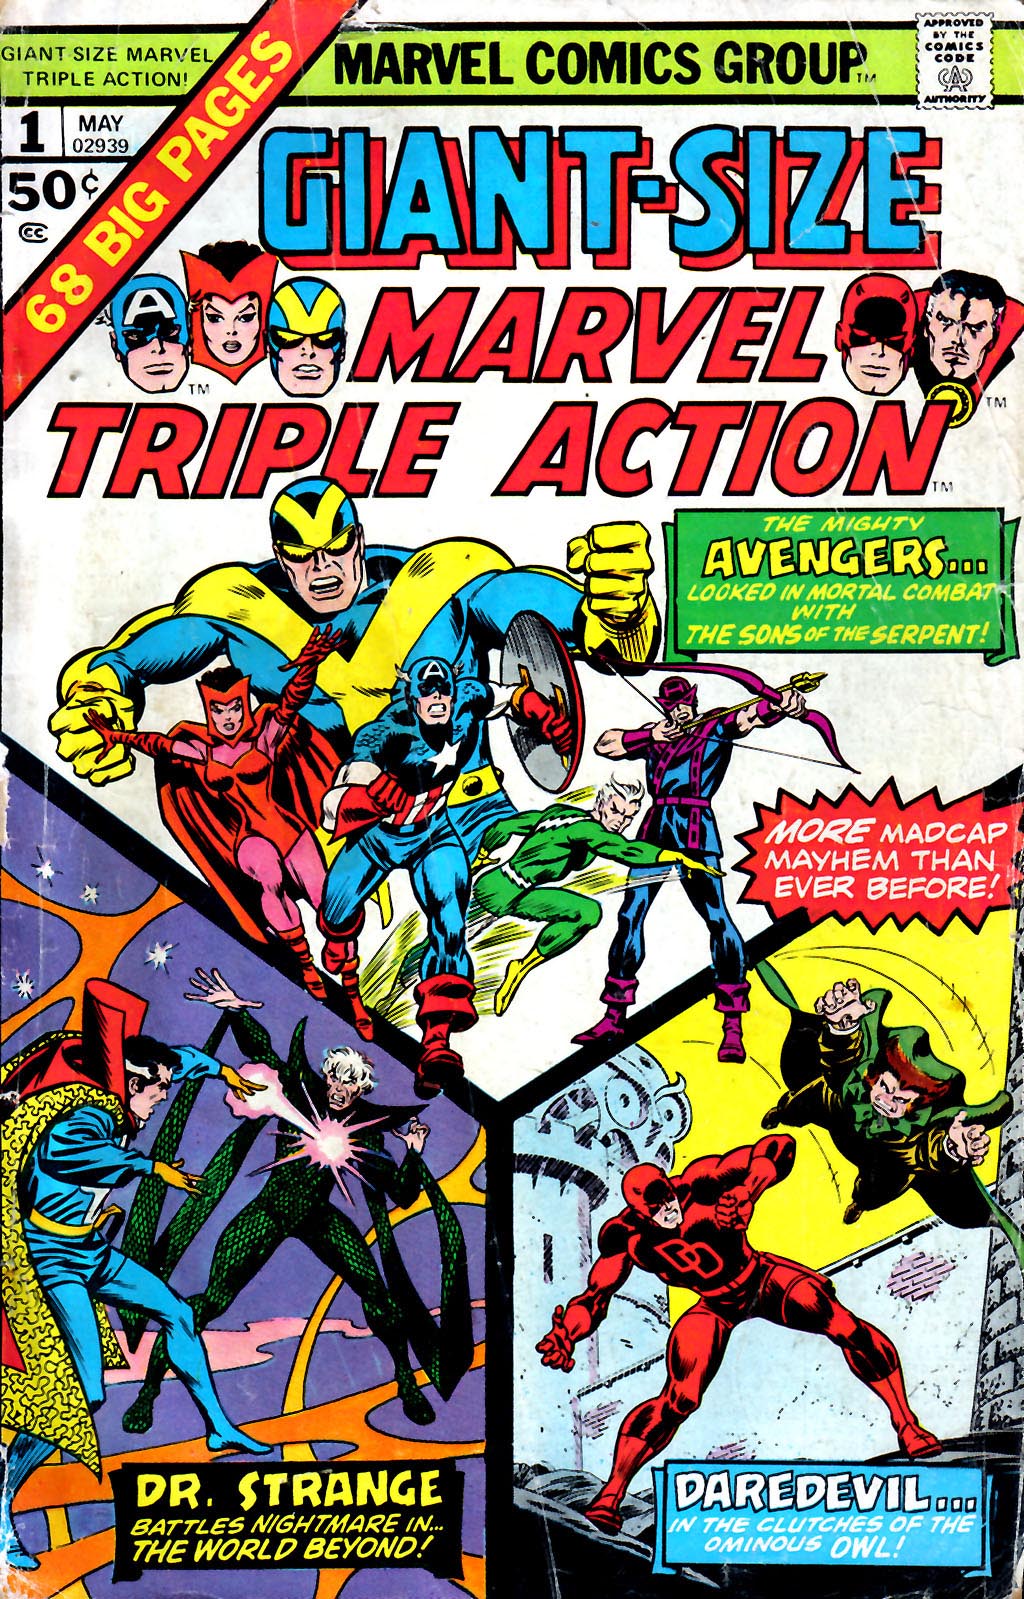 Read online Giant-Size Marvel Triple Action comic -  Issue #1 - 1